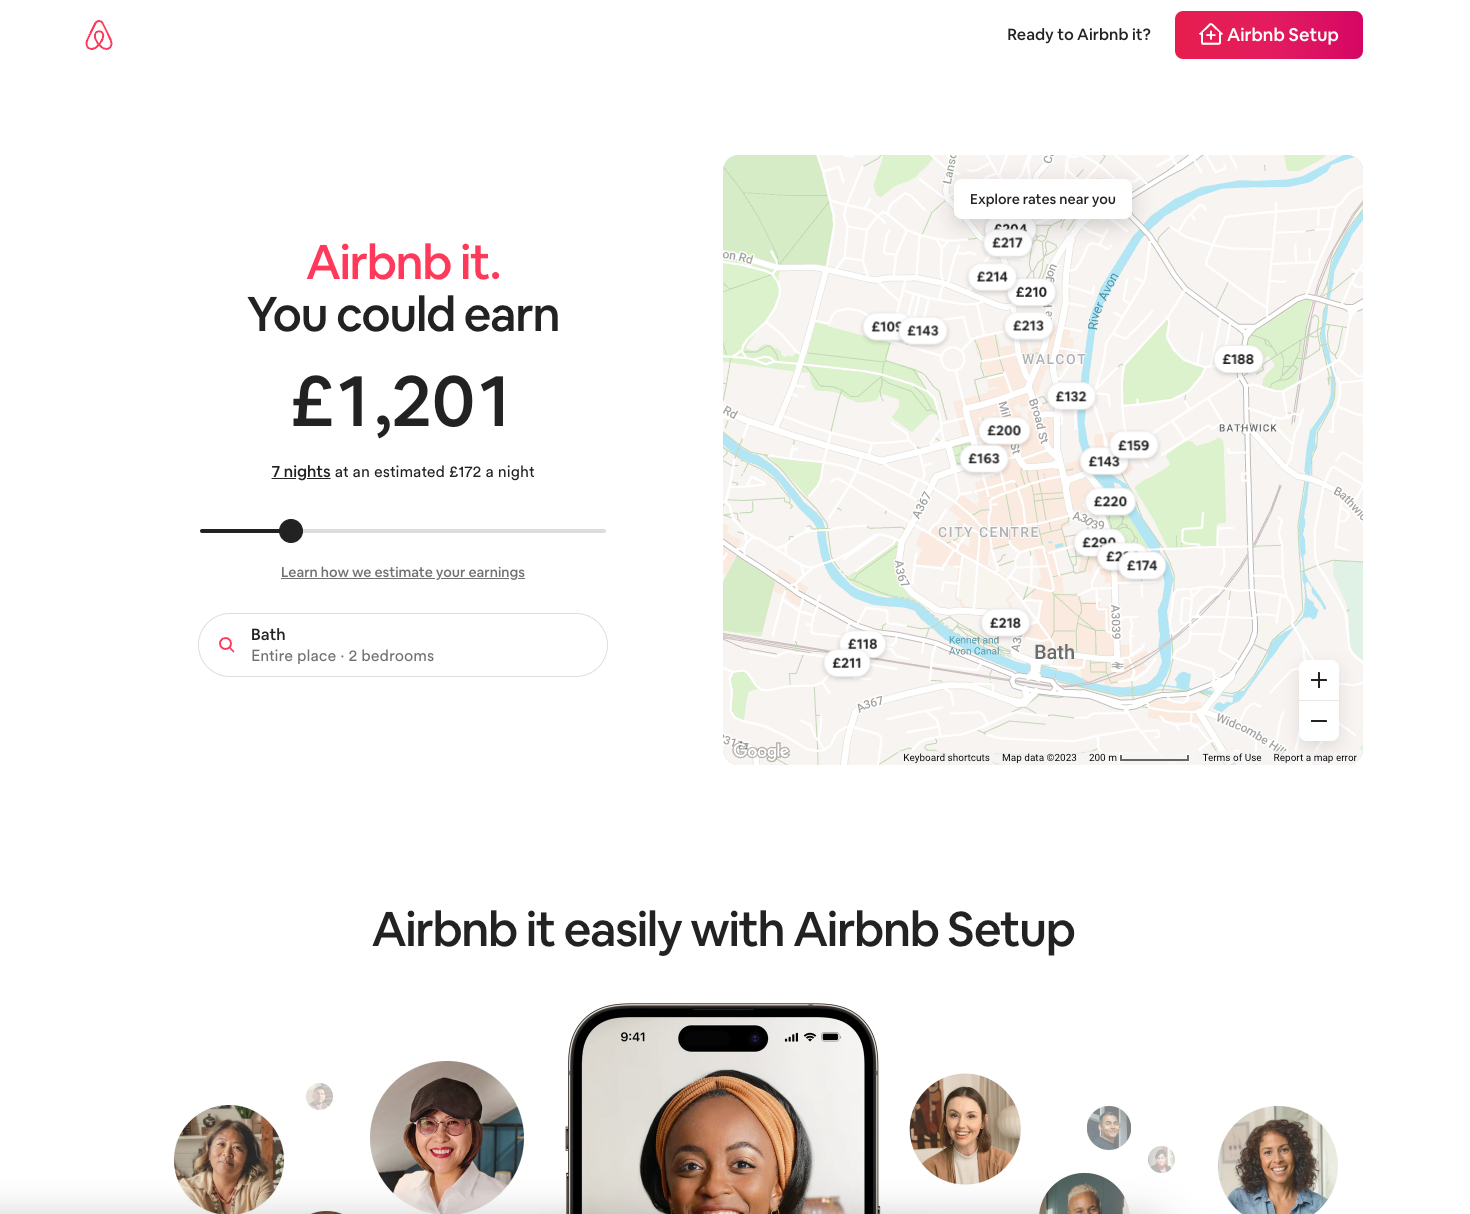 Image of Airbnb Website